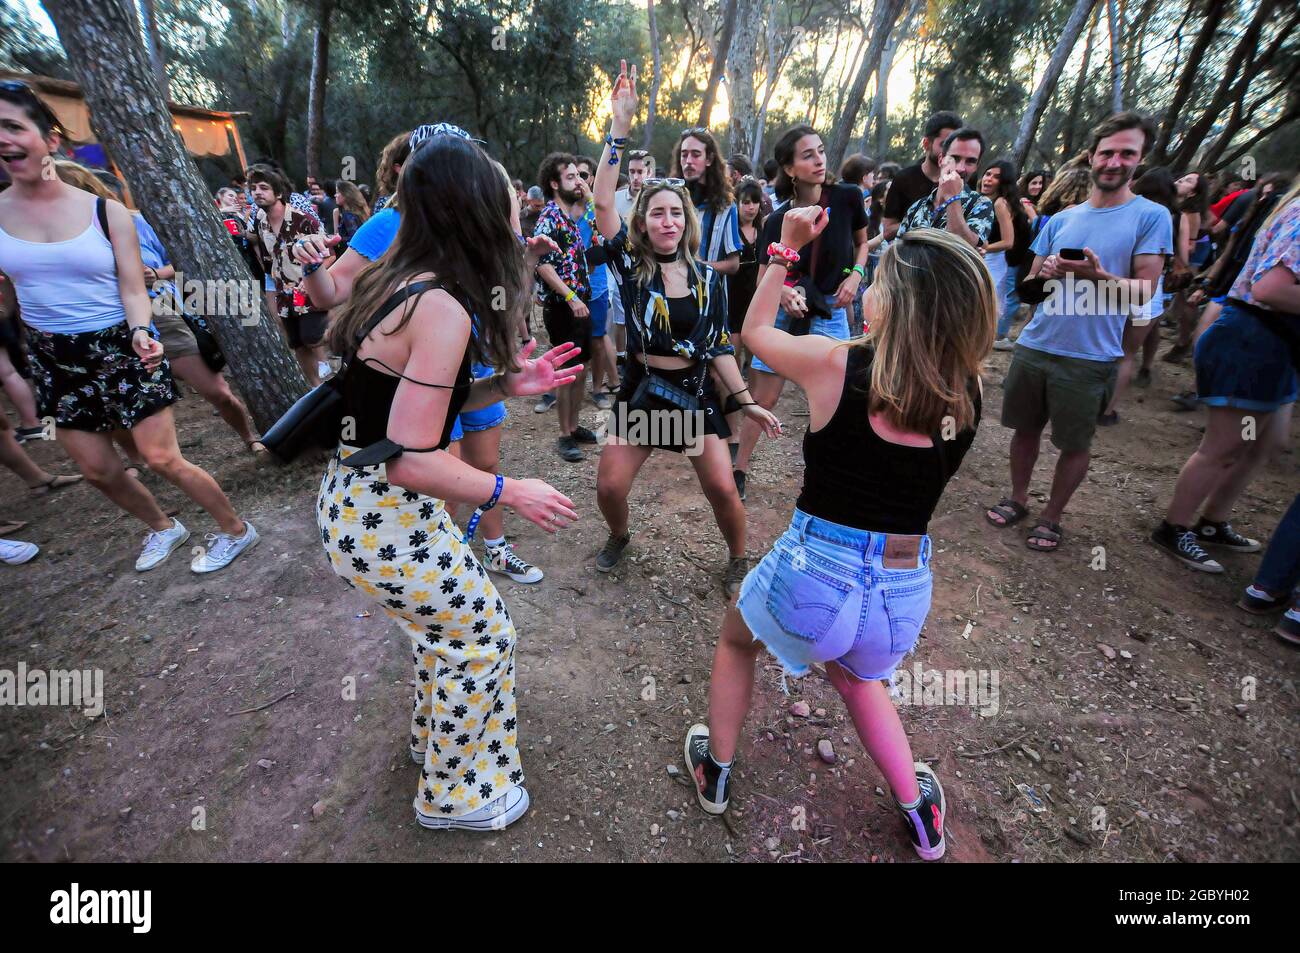 Catalonia, Spain. August 5th 2021: People without face masks or keeping safe distance dance during the Festival Vida 2021.The Vida 2021, Canet Rock and Cruïlla music festivals, which were held in early July 2021 in Catalonia, left 2,279 Covid-19 positives among their 49,570 attendees, which included antigen tests at the access doors, according to a report from the Department of Health of the Government of Catalonia made 14 days after the Music Festivals. (Photo by Ramon Costa/SOPA Images/Sipa USA) Credit: Sipa US/Alamy Live News Stock Photo